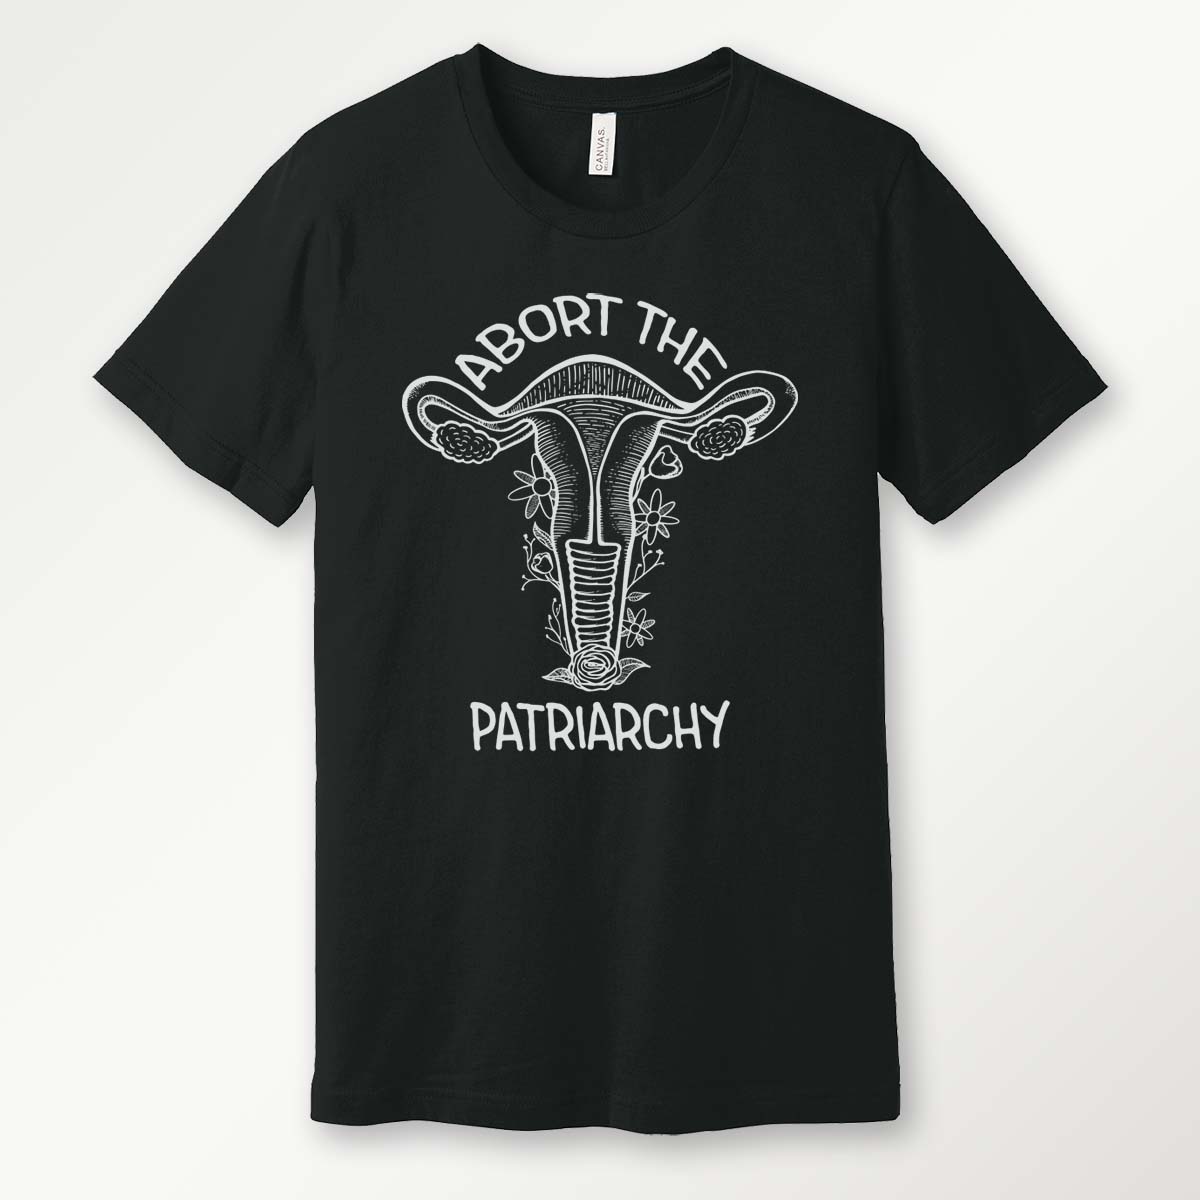 black t-shirt with a white screen printed floral uterus graphic and "abort the patriarchy" text